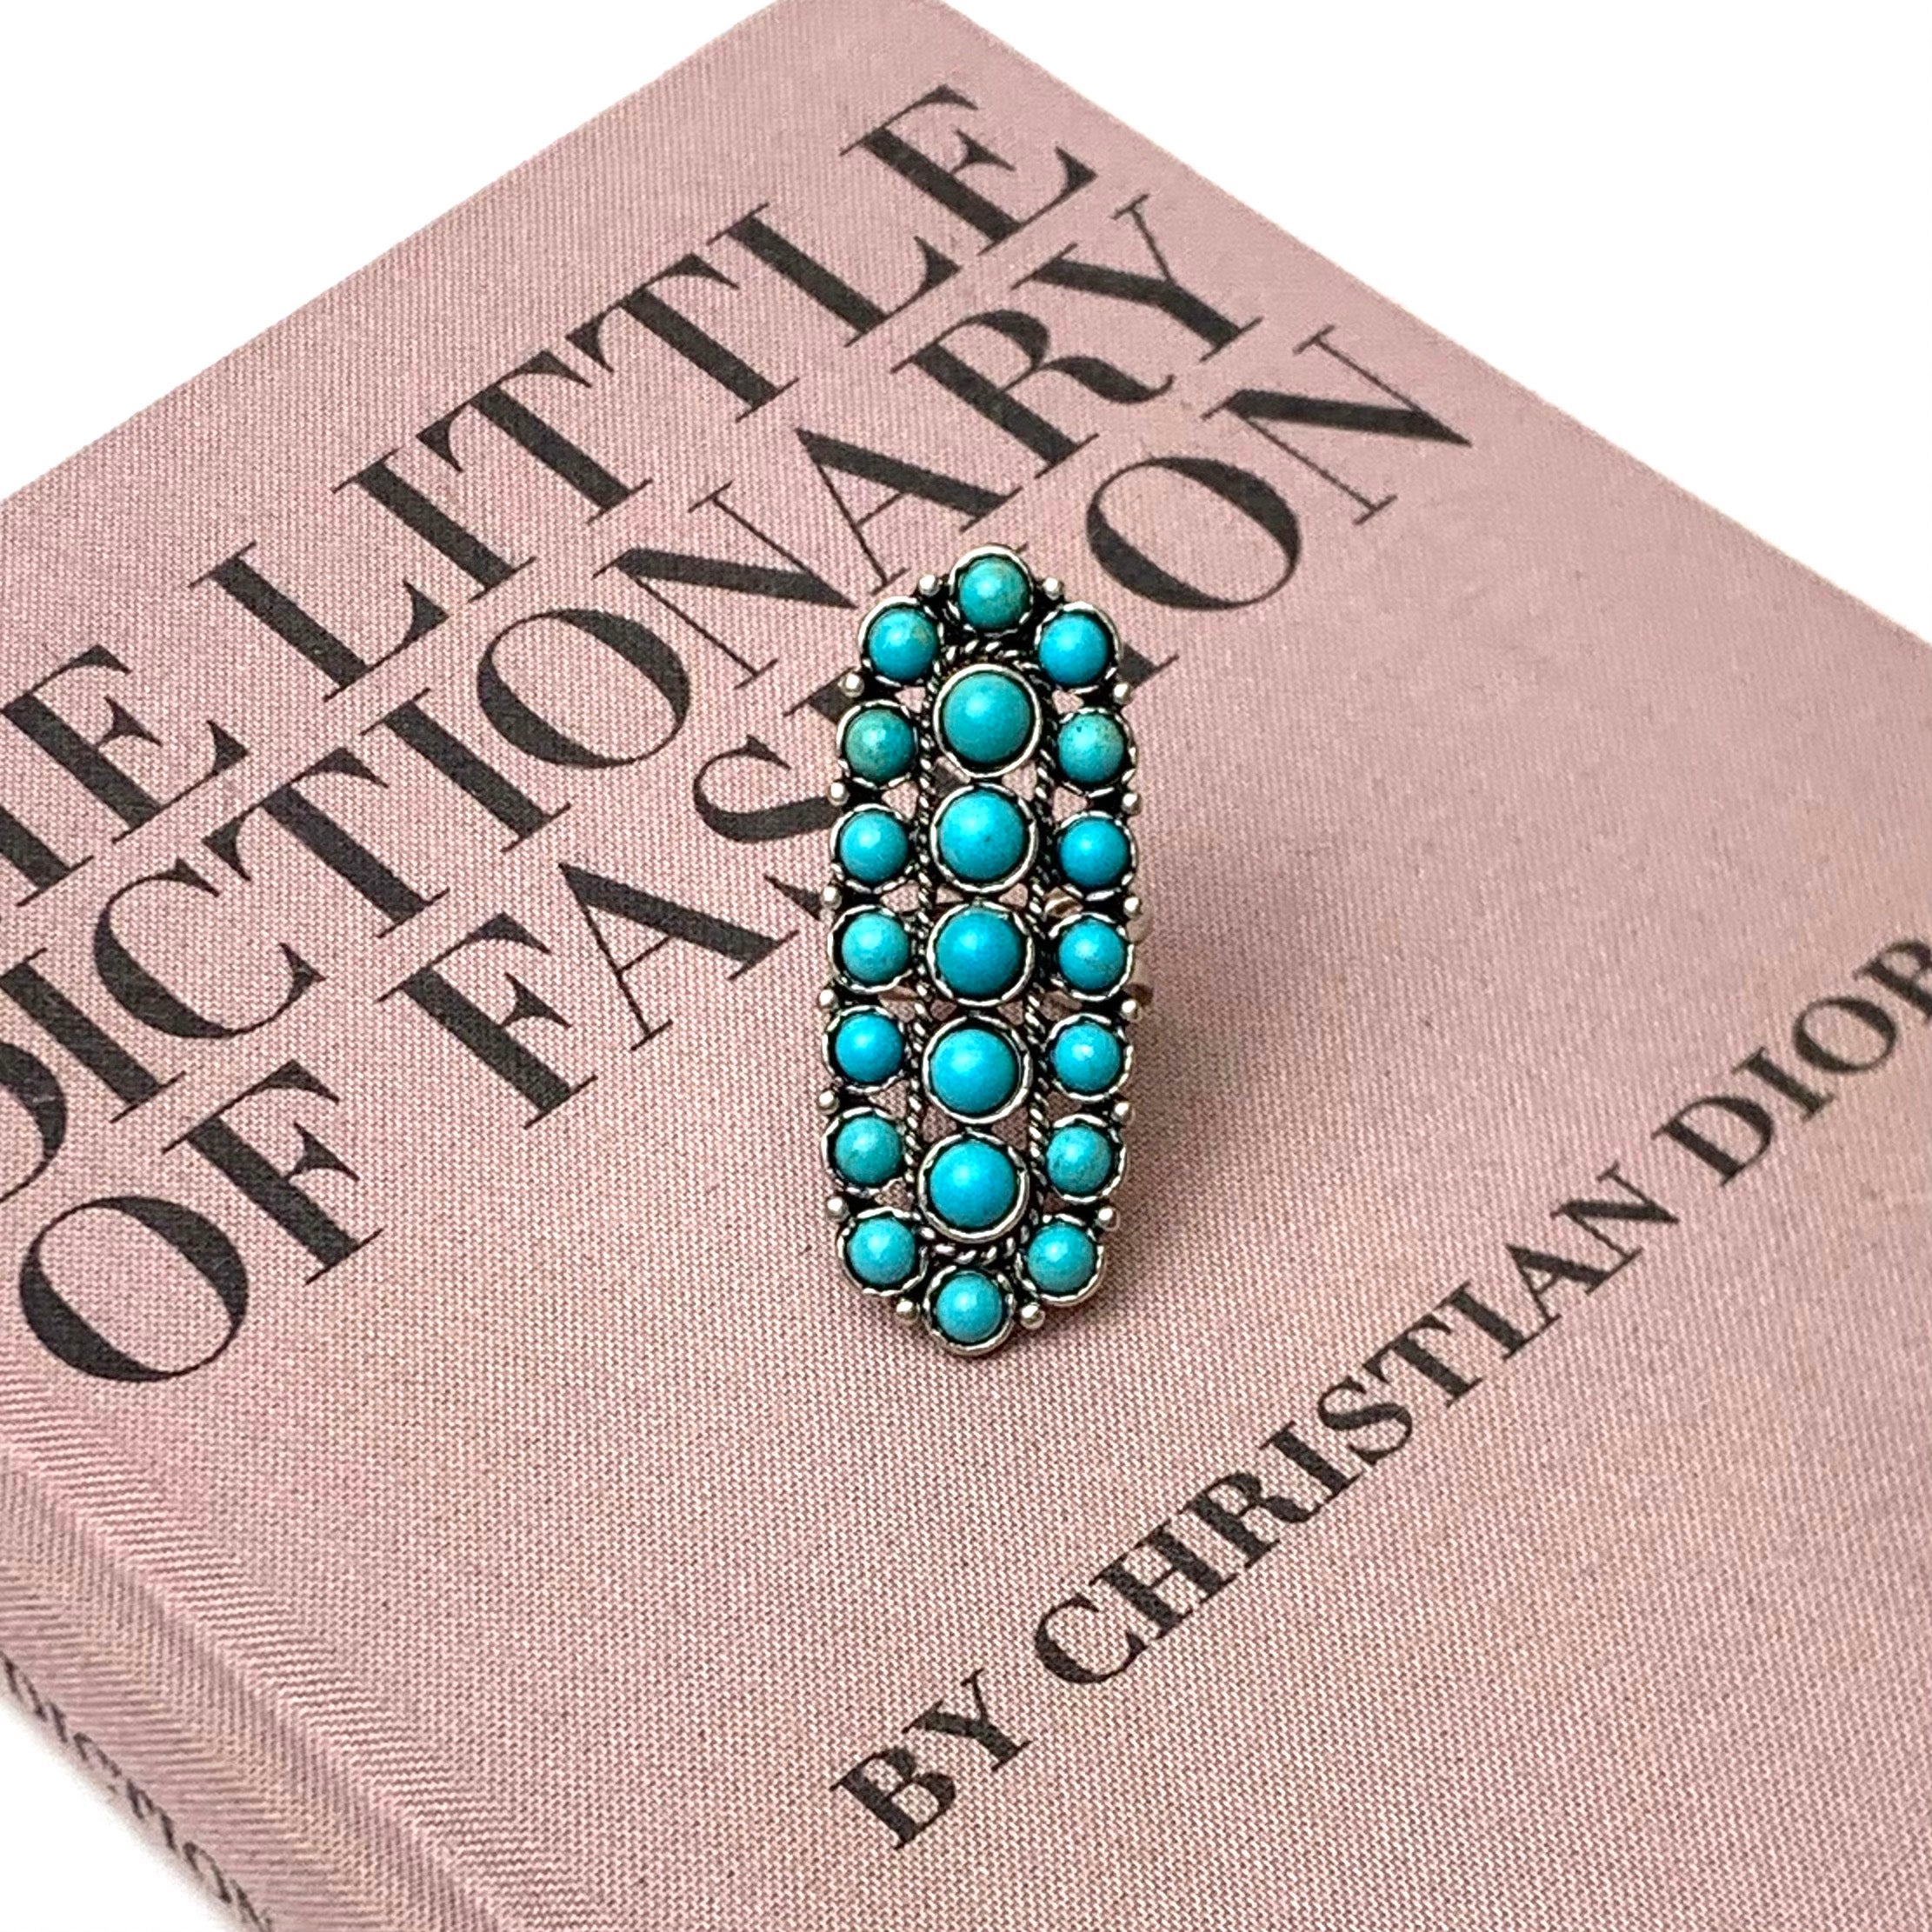 Western Long Oval Faux Turquoise Cluster Cuff Ring - Giddy Up Glamour Boutique